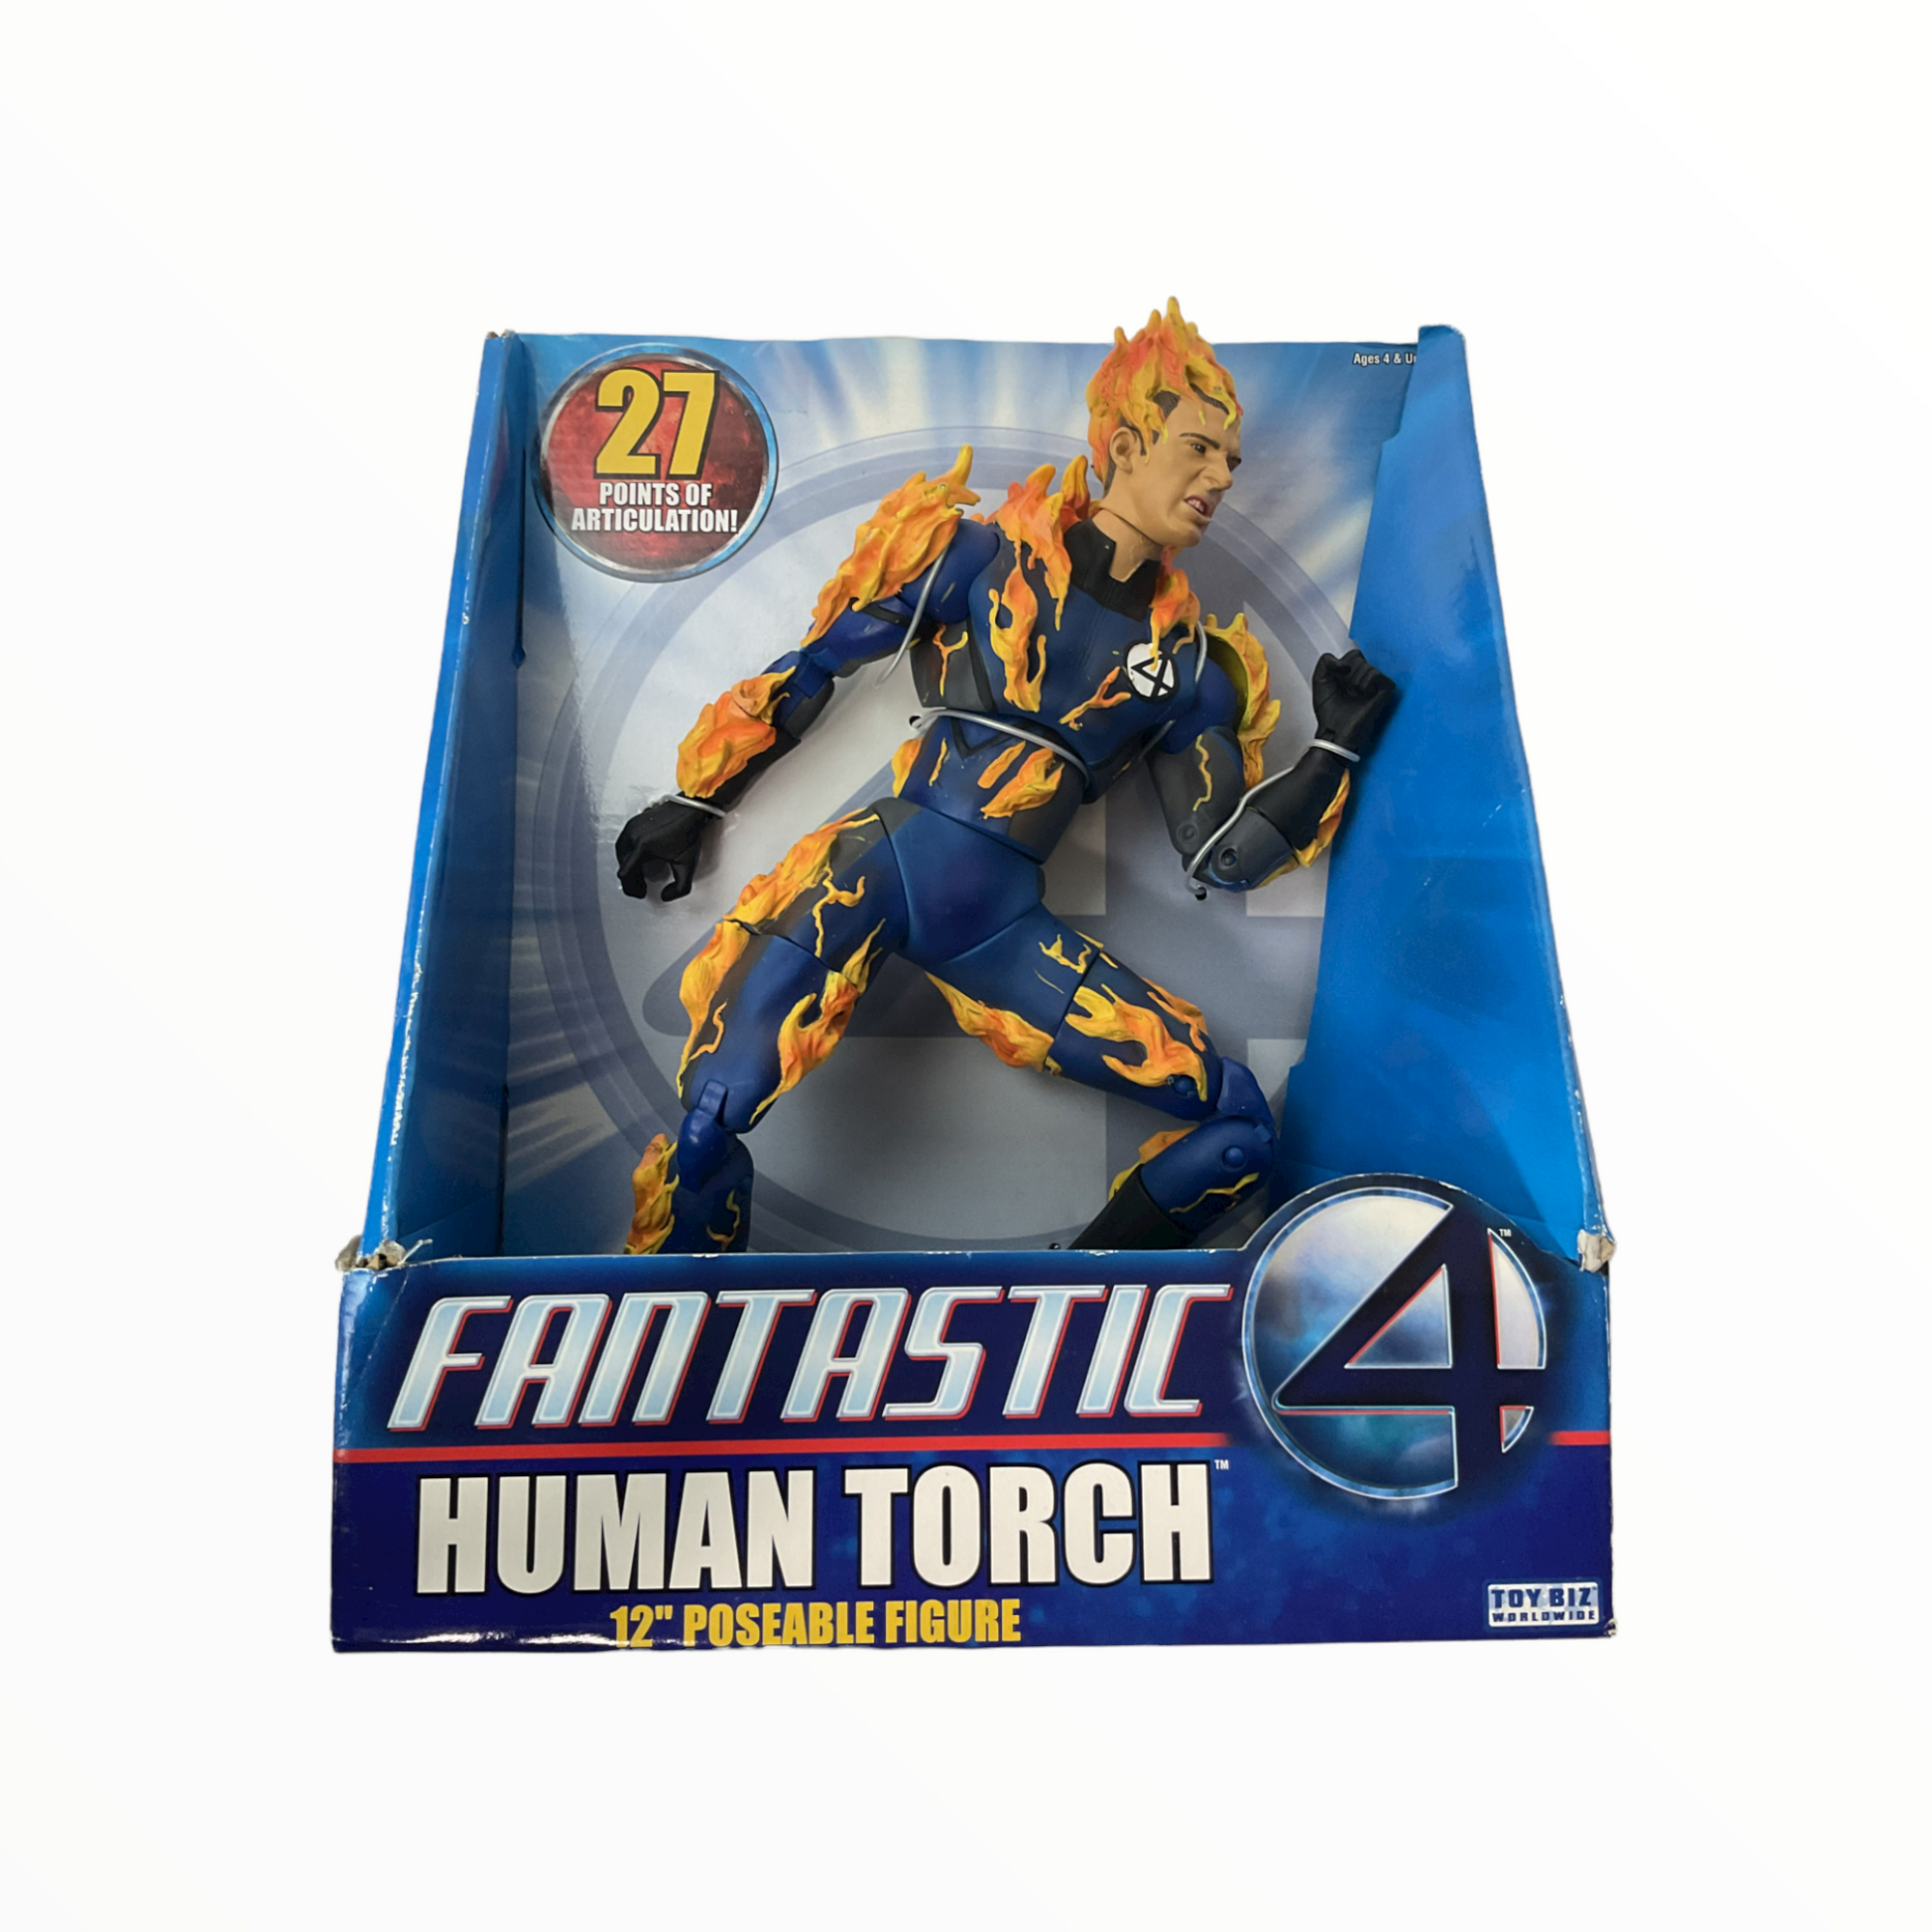 Fantastic 4 Movie Series II Deluxe 12" Figure: Human Torch (Decorated)